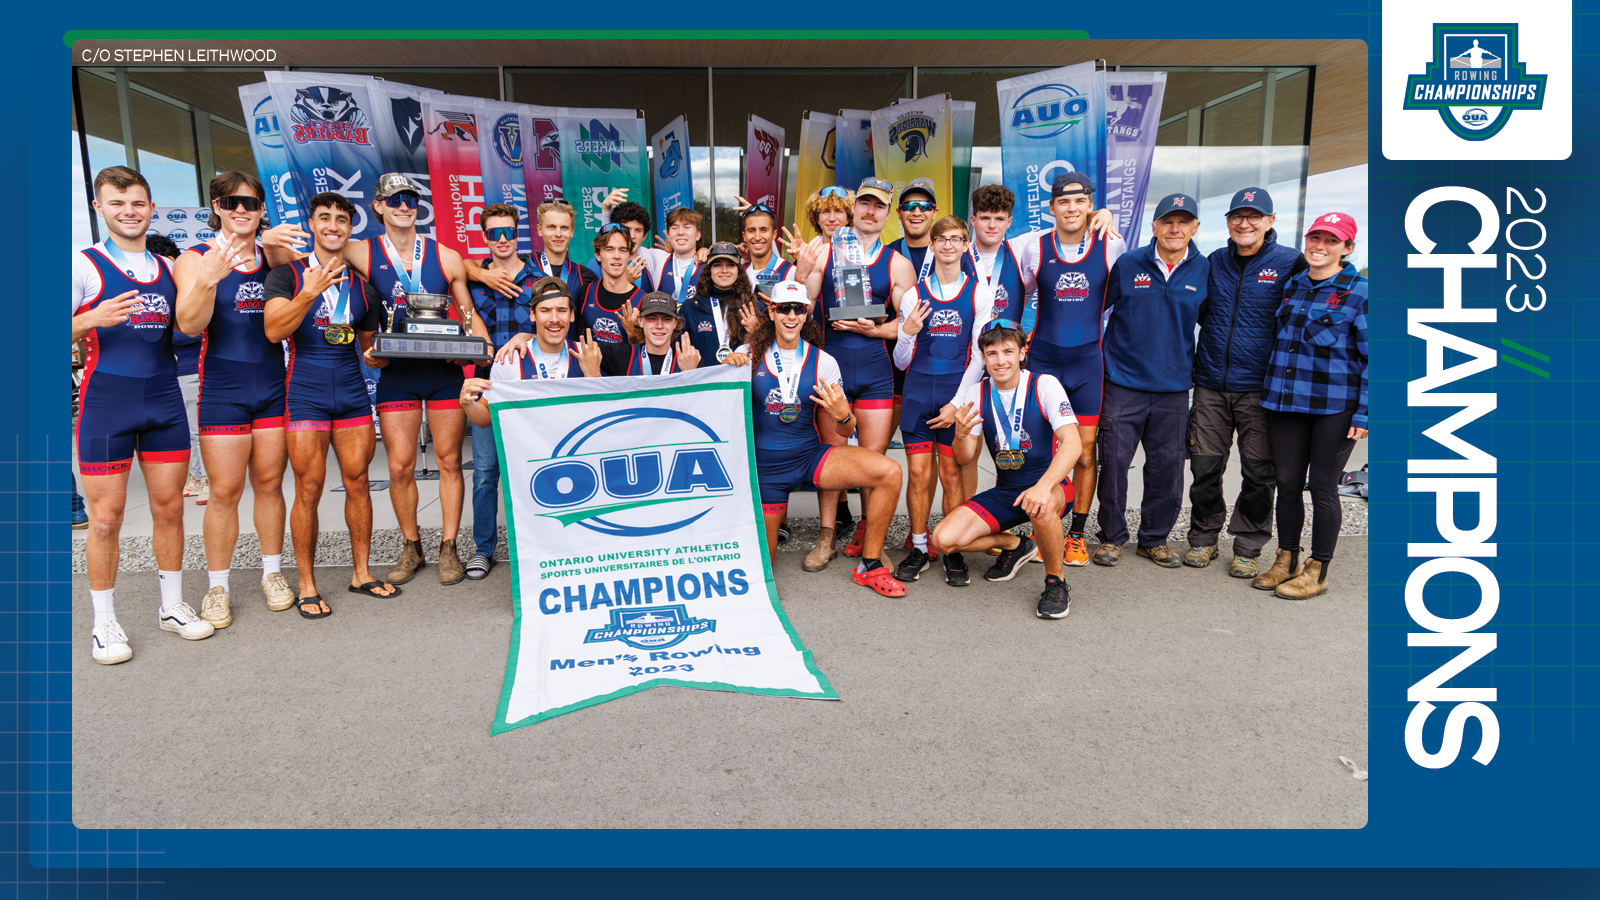 Predominantly blue graphic covered mostly by 2023 OUA Men's Rowing Championship banner photo, with the corresponding championship logo and white text reading '2023 Champions' on the right side